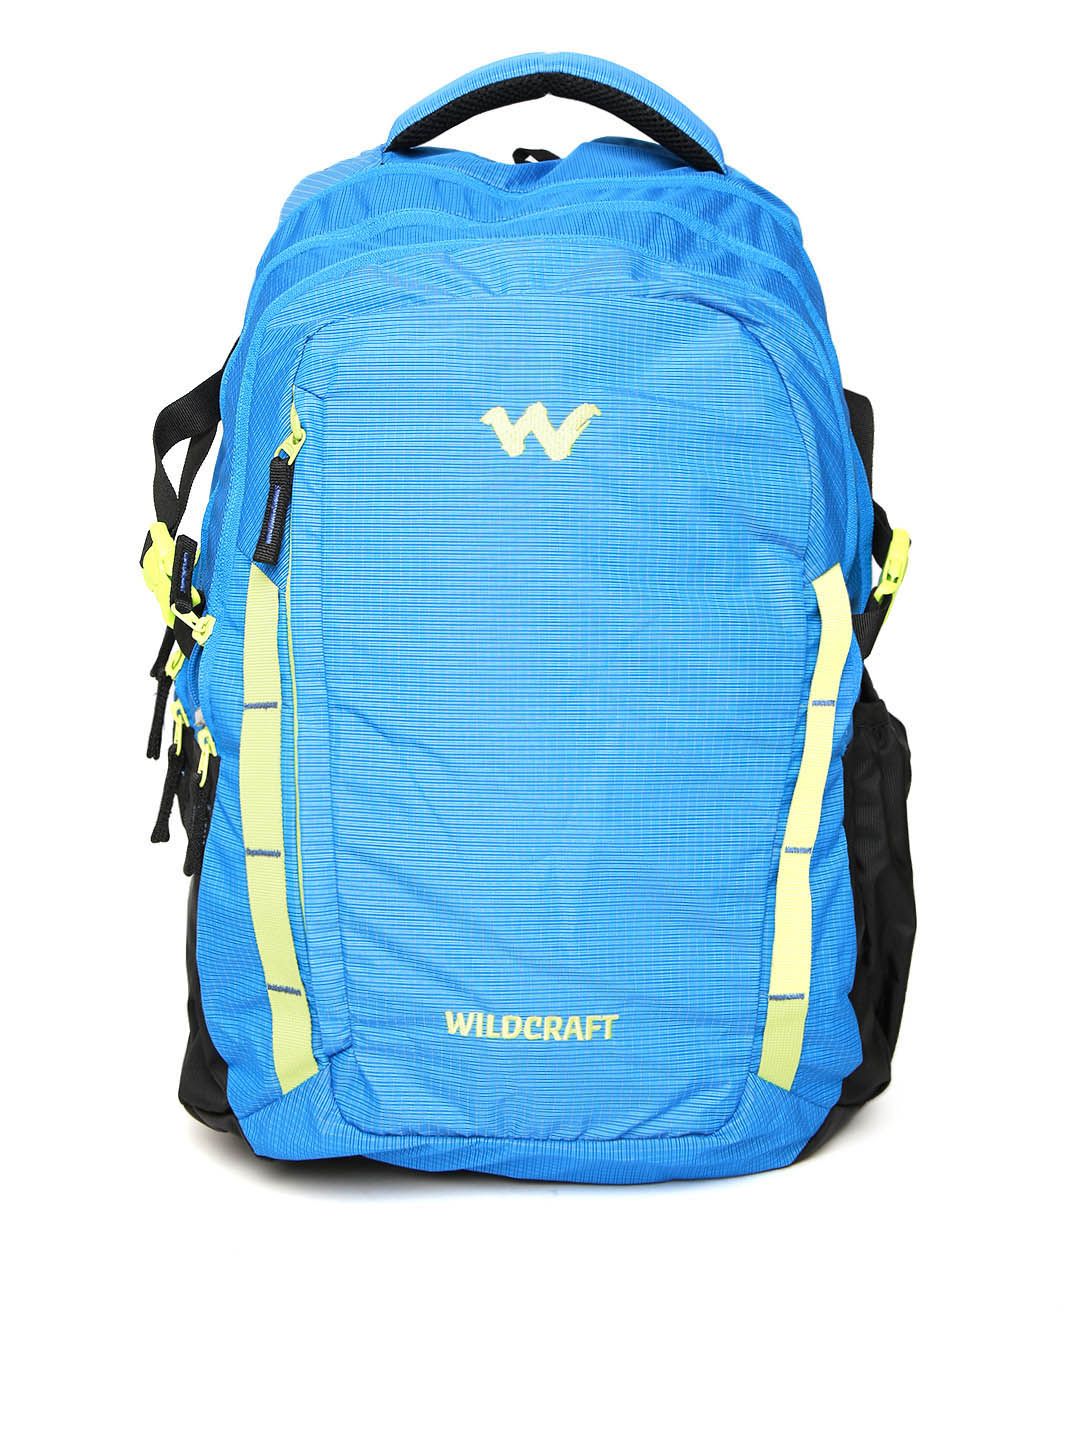 Wildcraft Unisex Blue WC 10 Latlong 9 Patterned Laptop Backpack Price in India